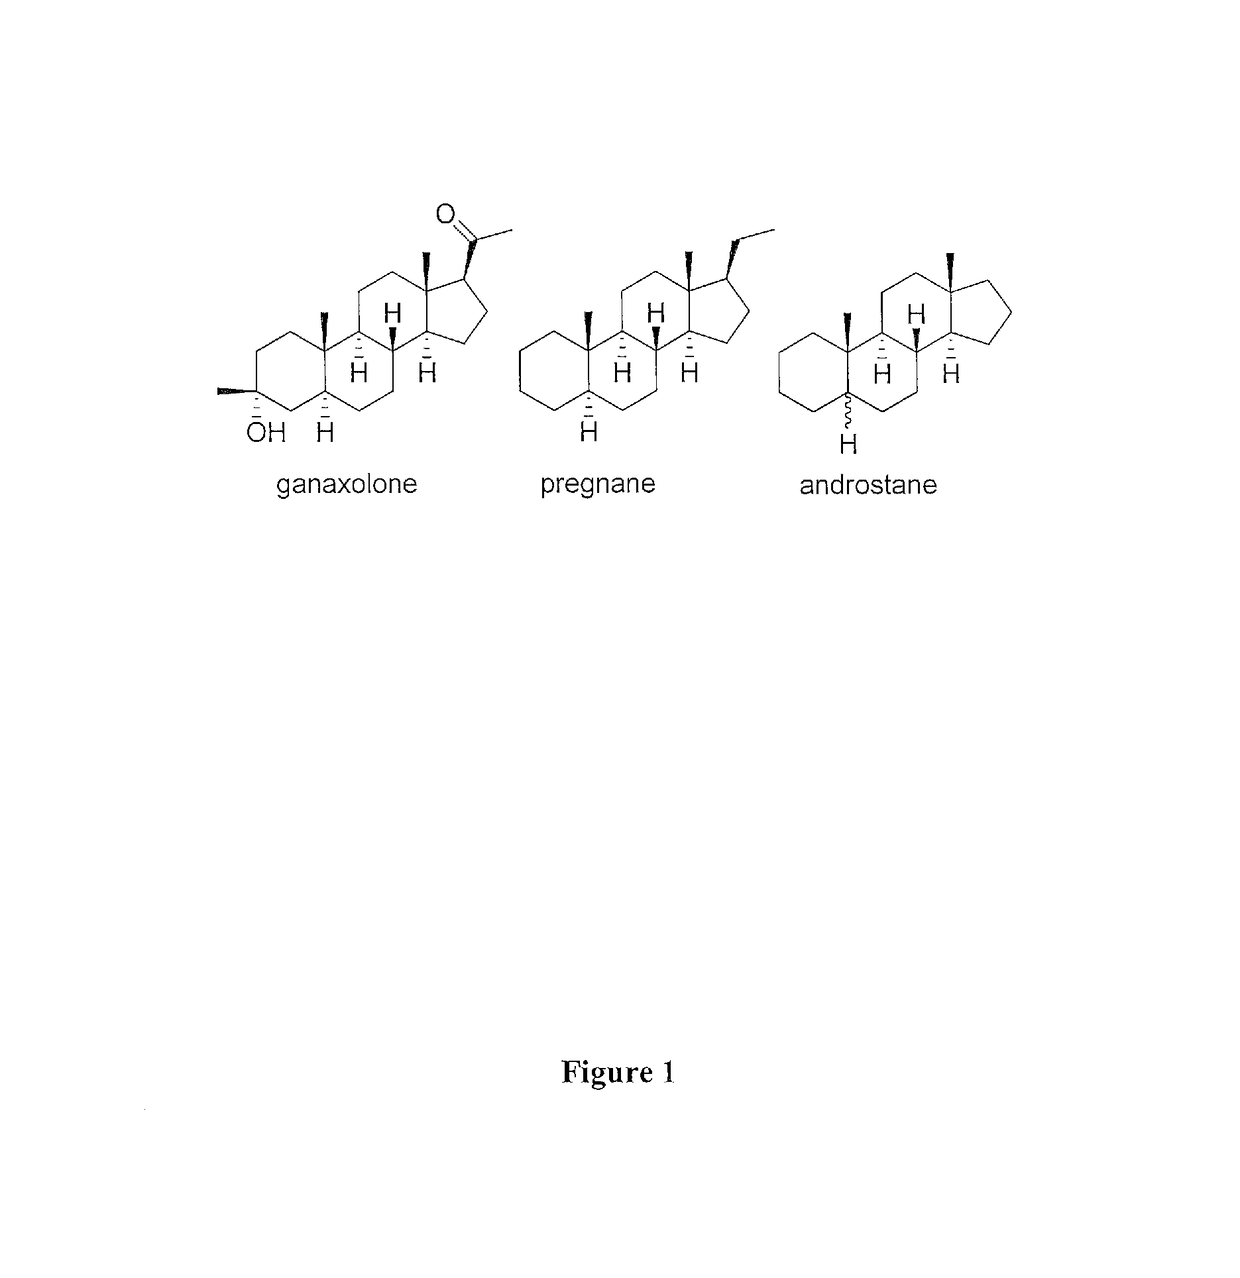 Method of treating organophosphate intoxication by administration of neurosteroids